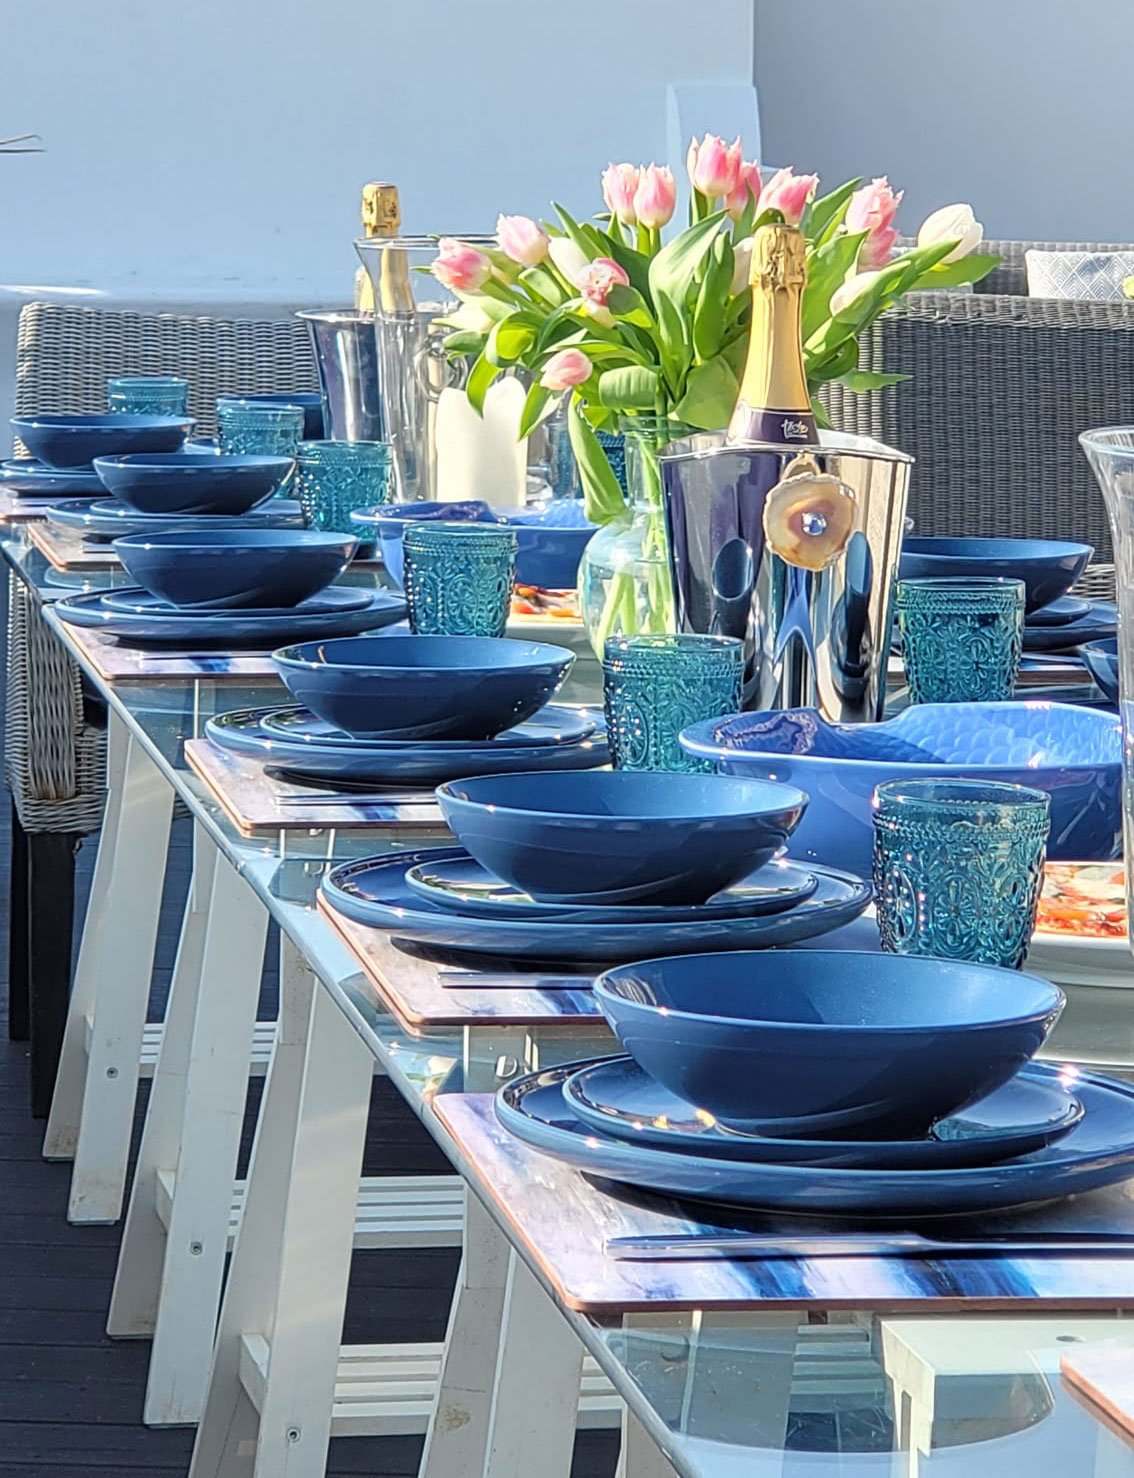 New-England-Luxury-Beach-House-West-Sussex-dining-outside.jpg